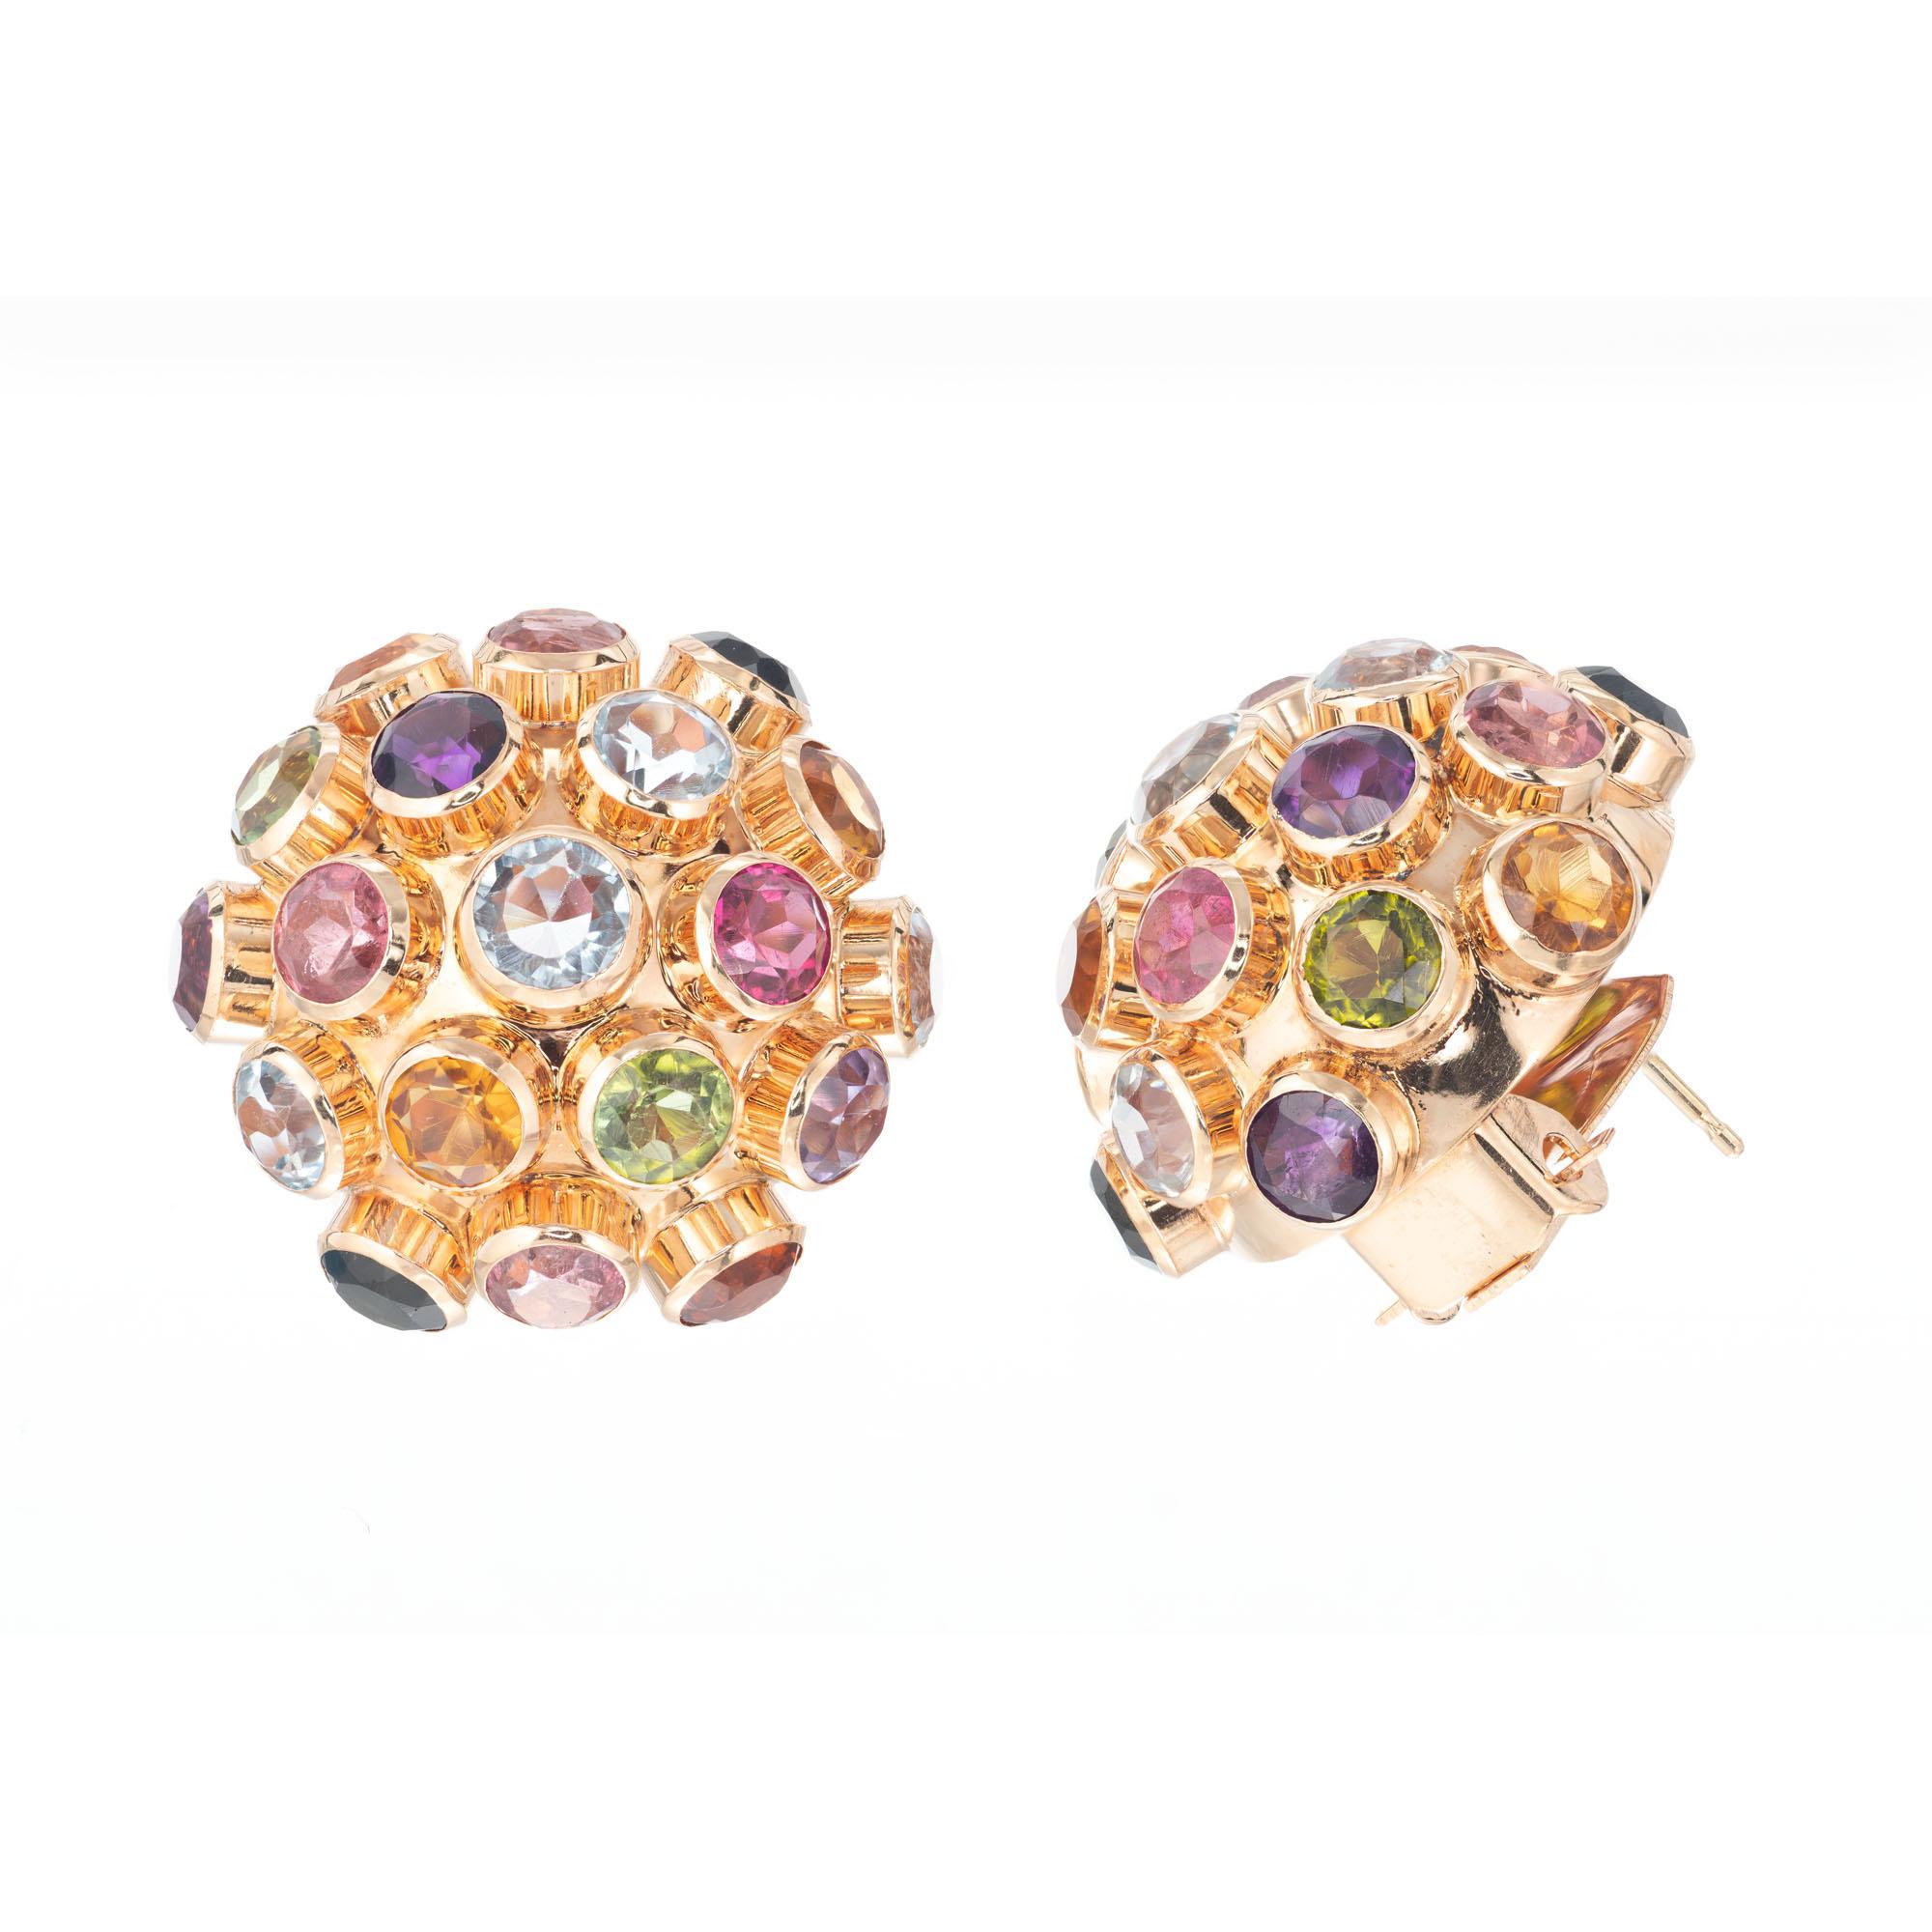 Sputnik design clip post 18k yellow gold multi-color genuine stone earrings. Including Aqua, citrine, amethyst, pink tourmaline, green tourmaline and garnet. 

38 multi-color semi-precious stones, approx. 7.60cts
18k yellow gold 
Stamped: 18k
11.3